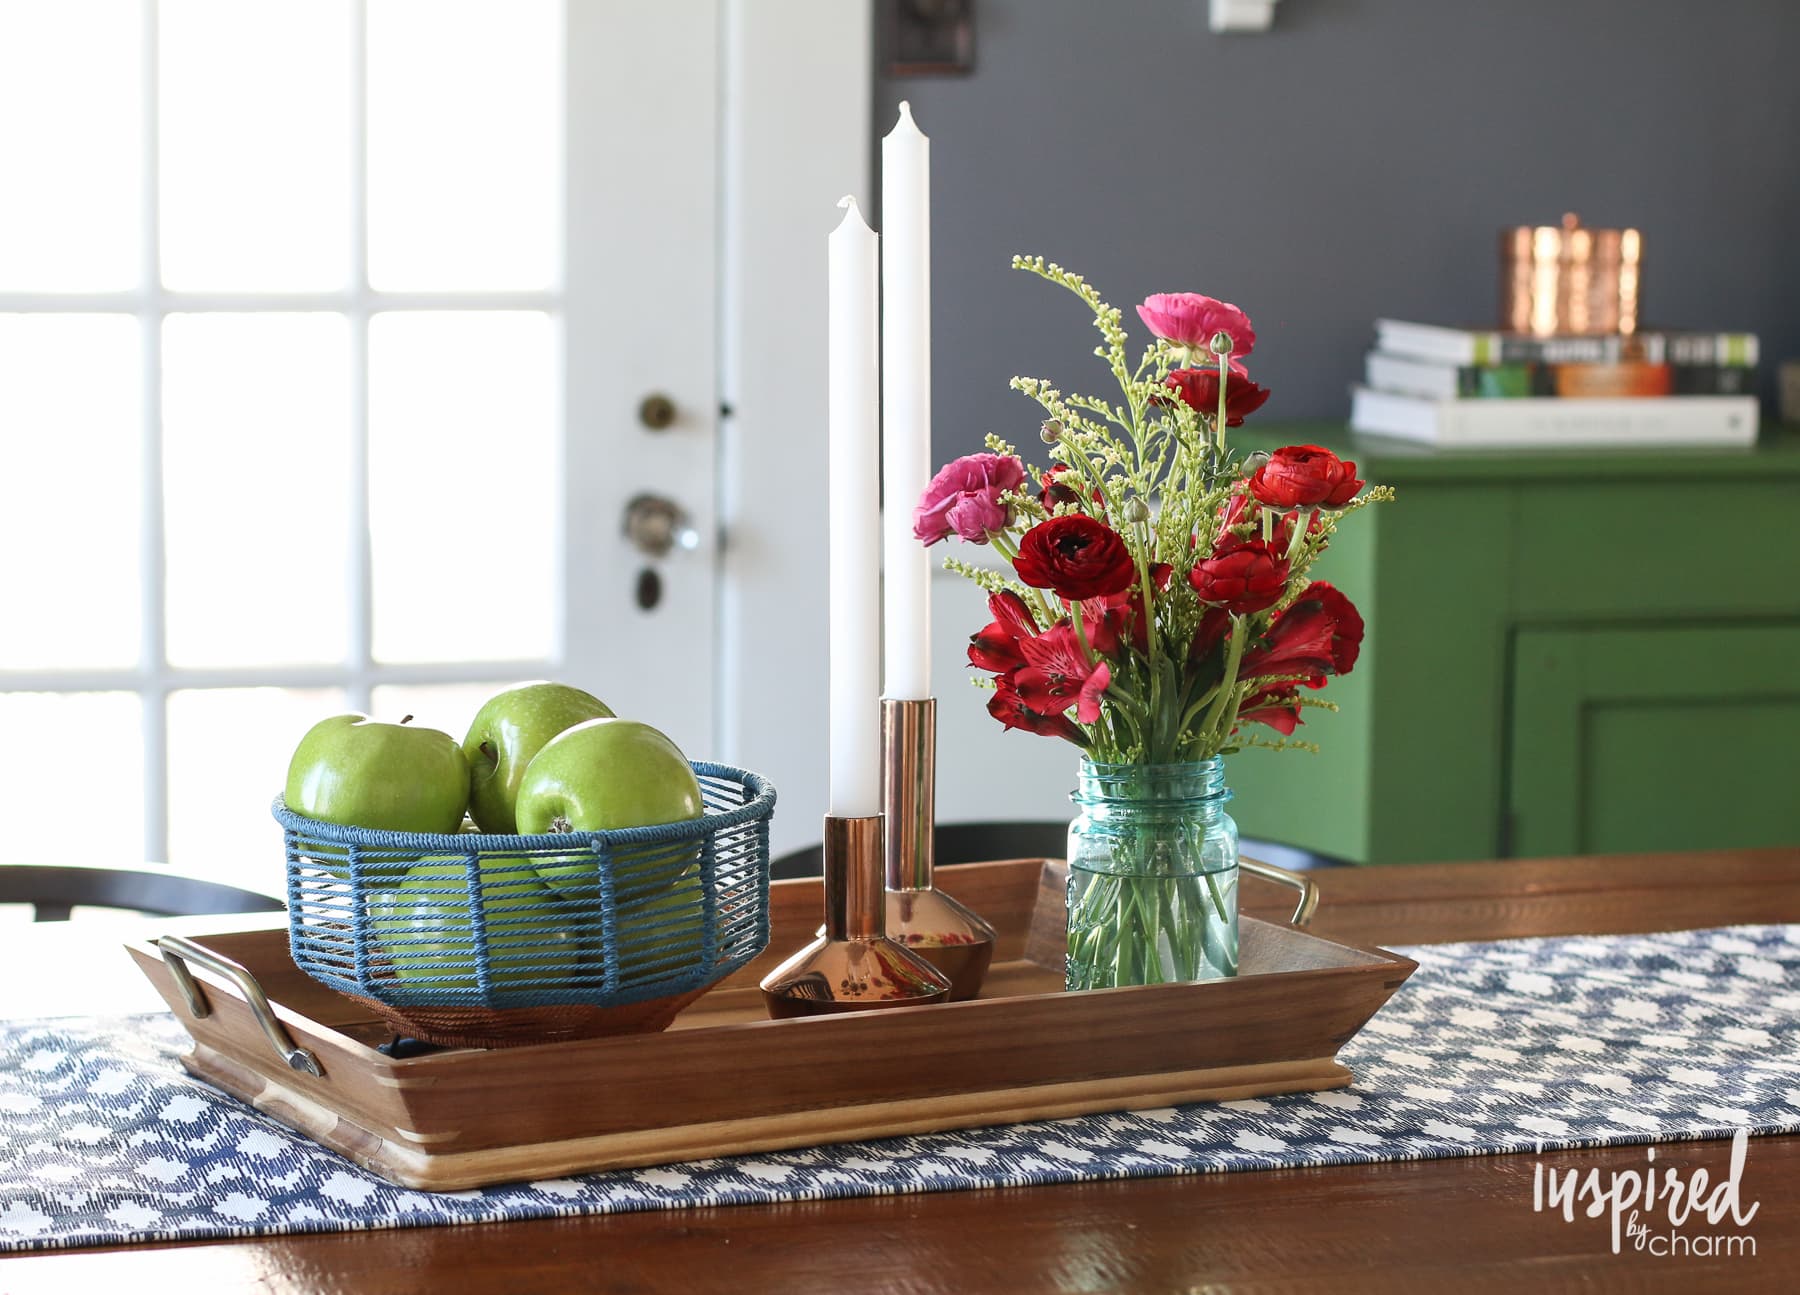 Spring Table Styling Ideas | Inspired by Charm